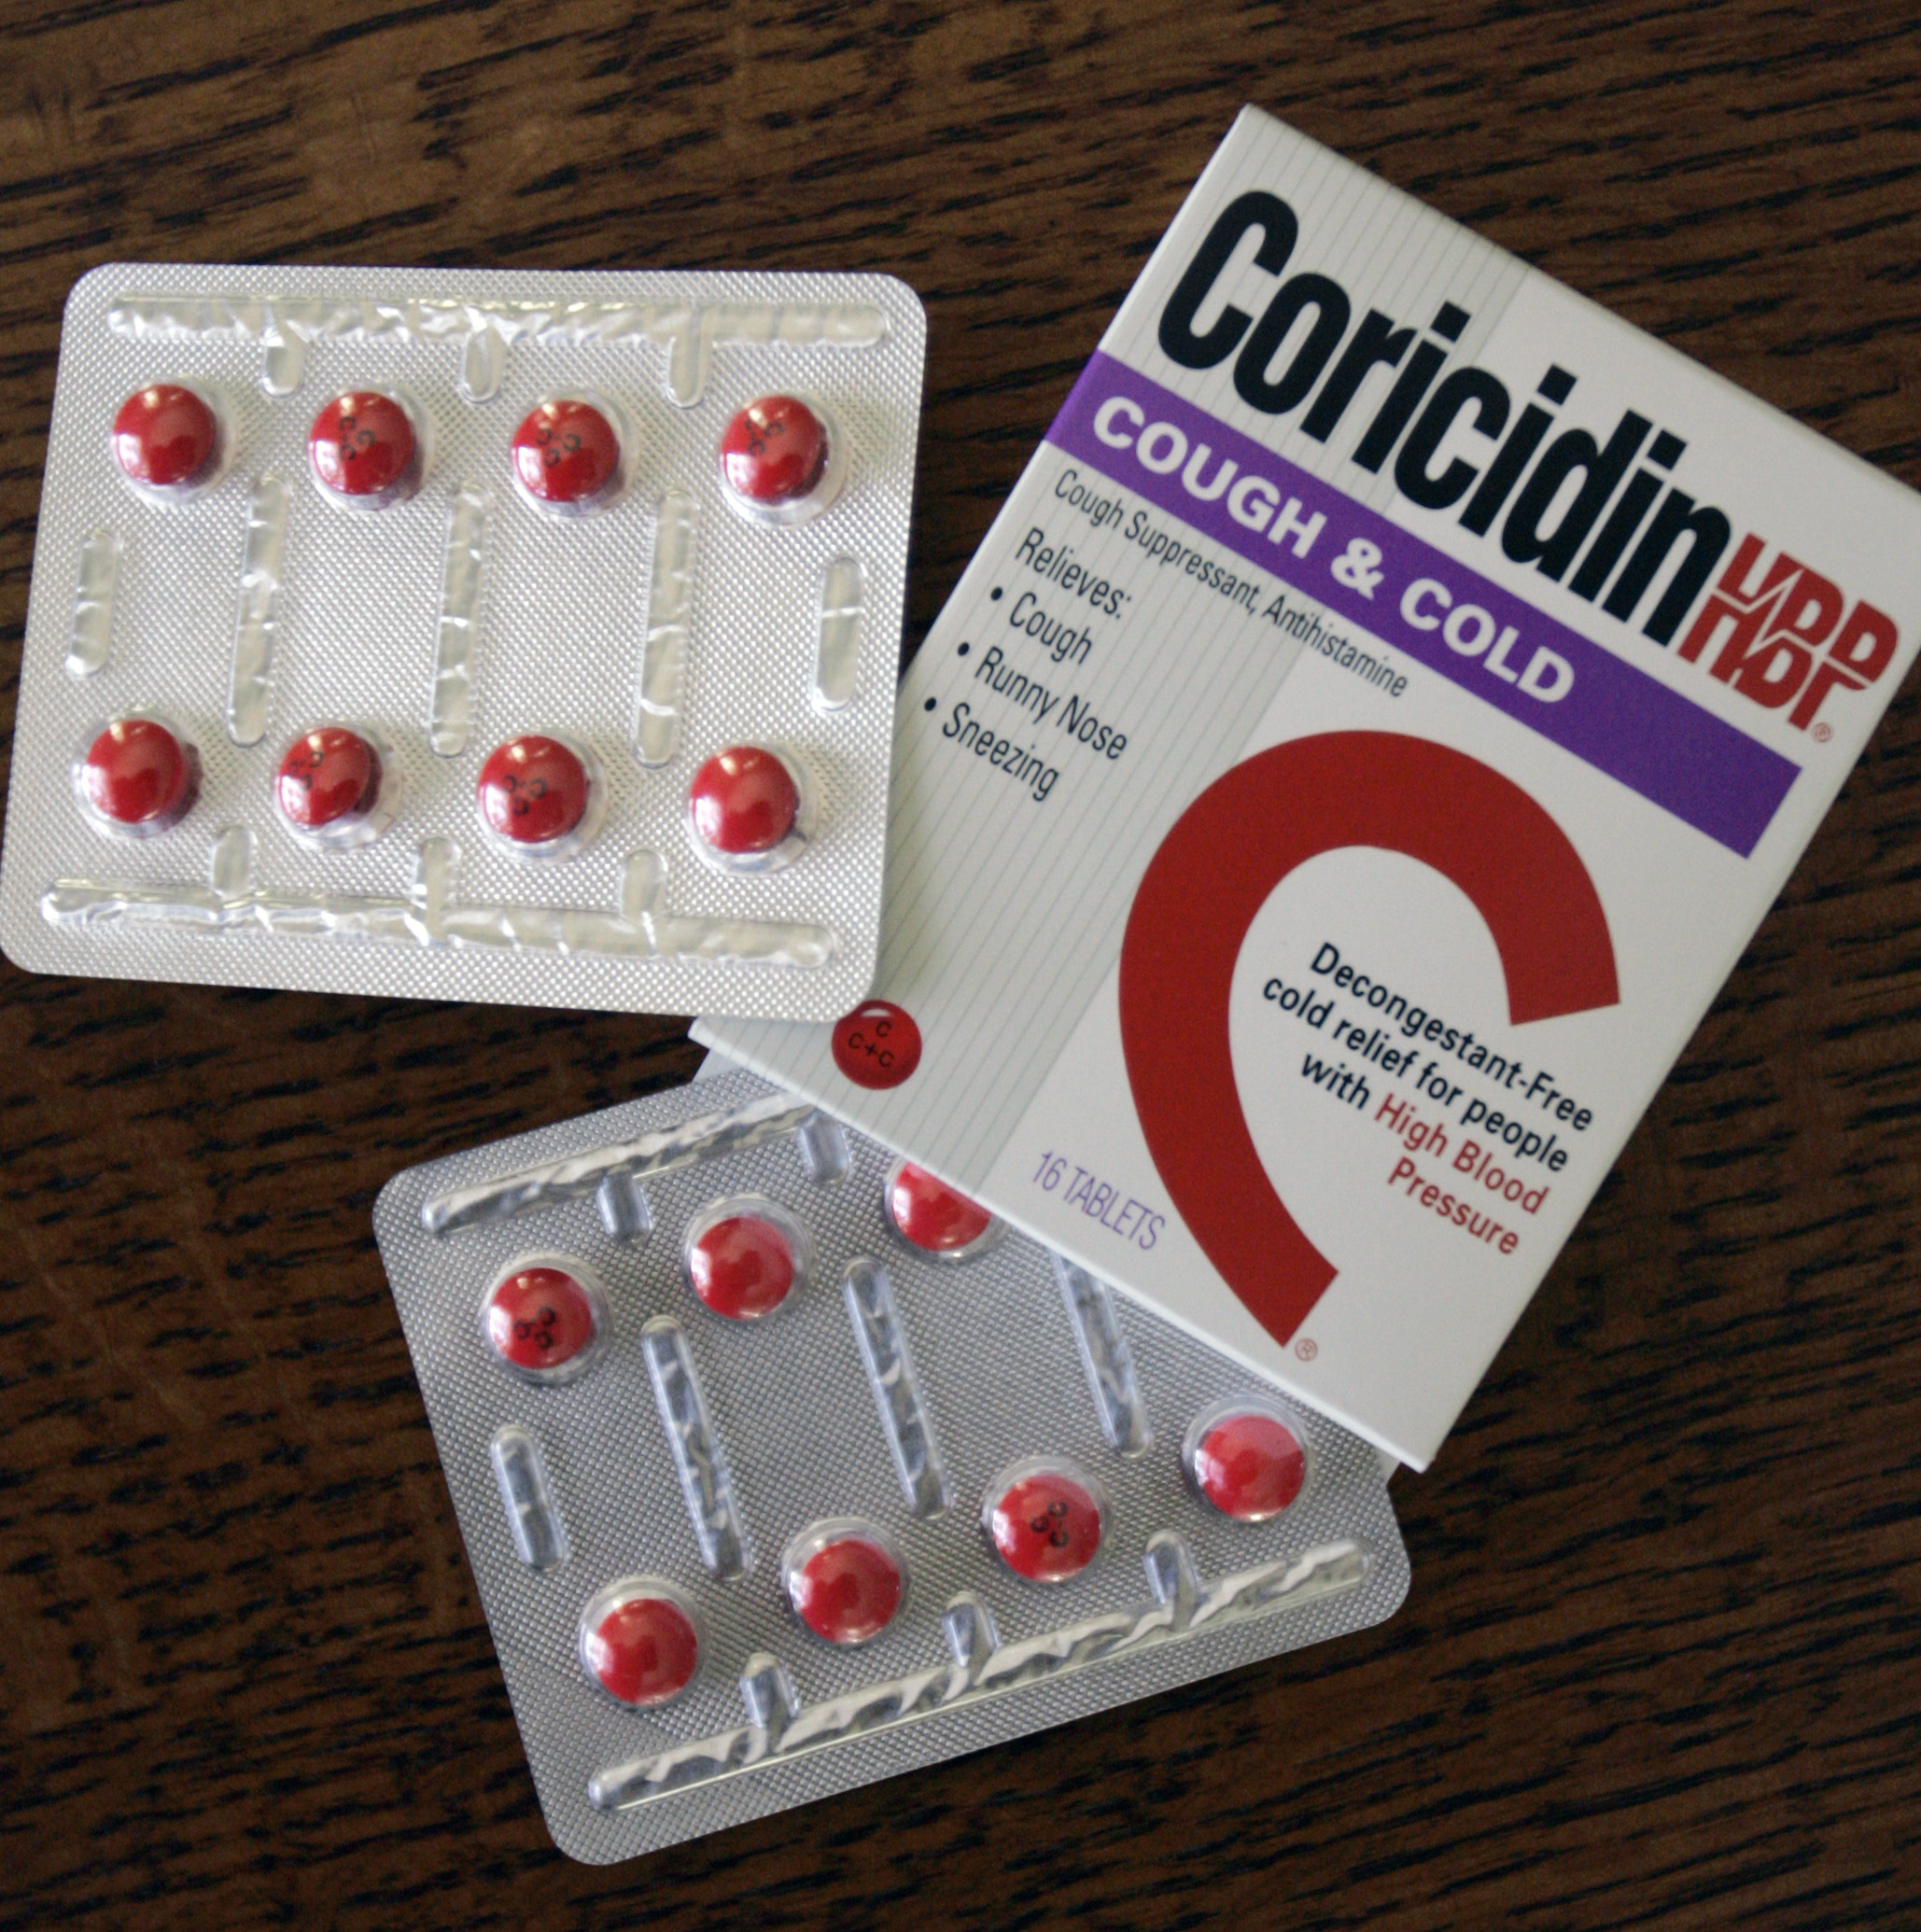 Triple C a new drug of choice for teens